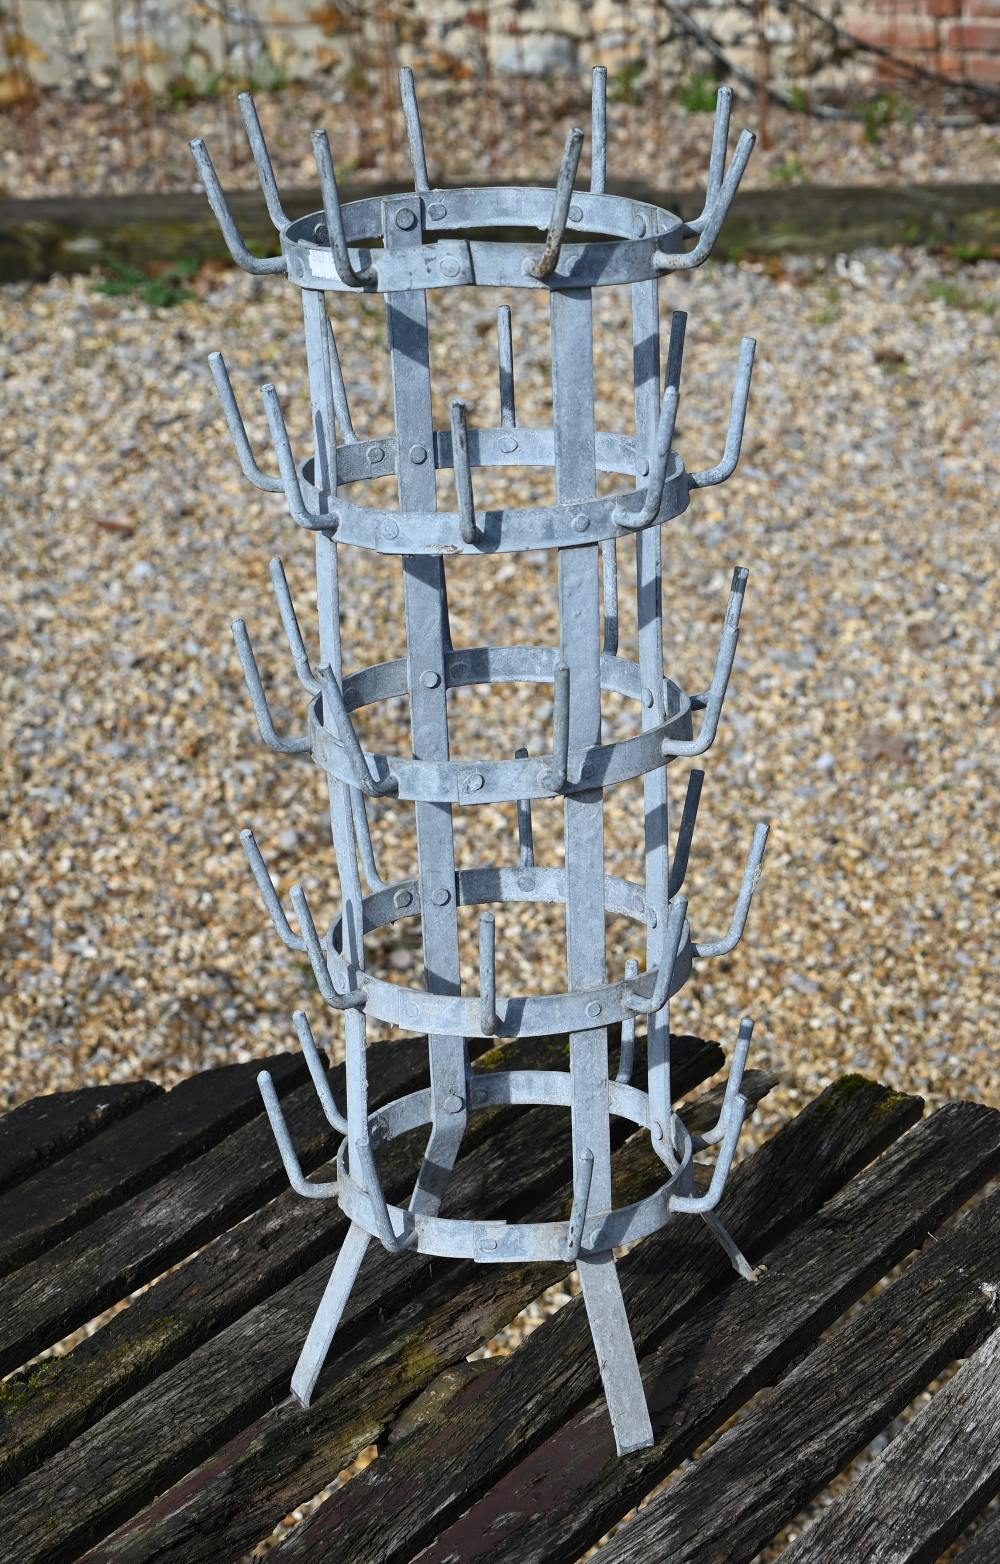 A vintage French galvanised five tier bottle drying rack